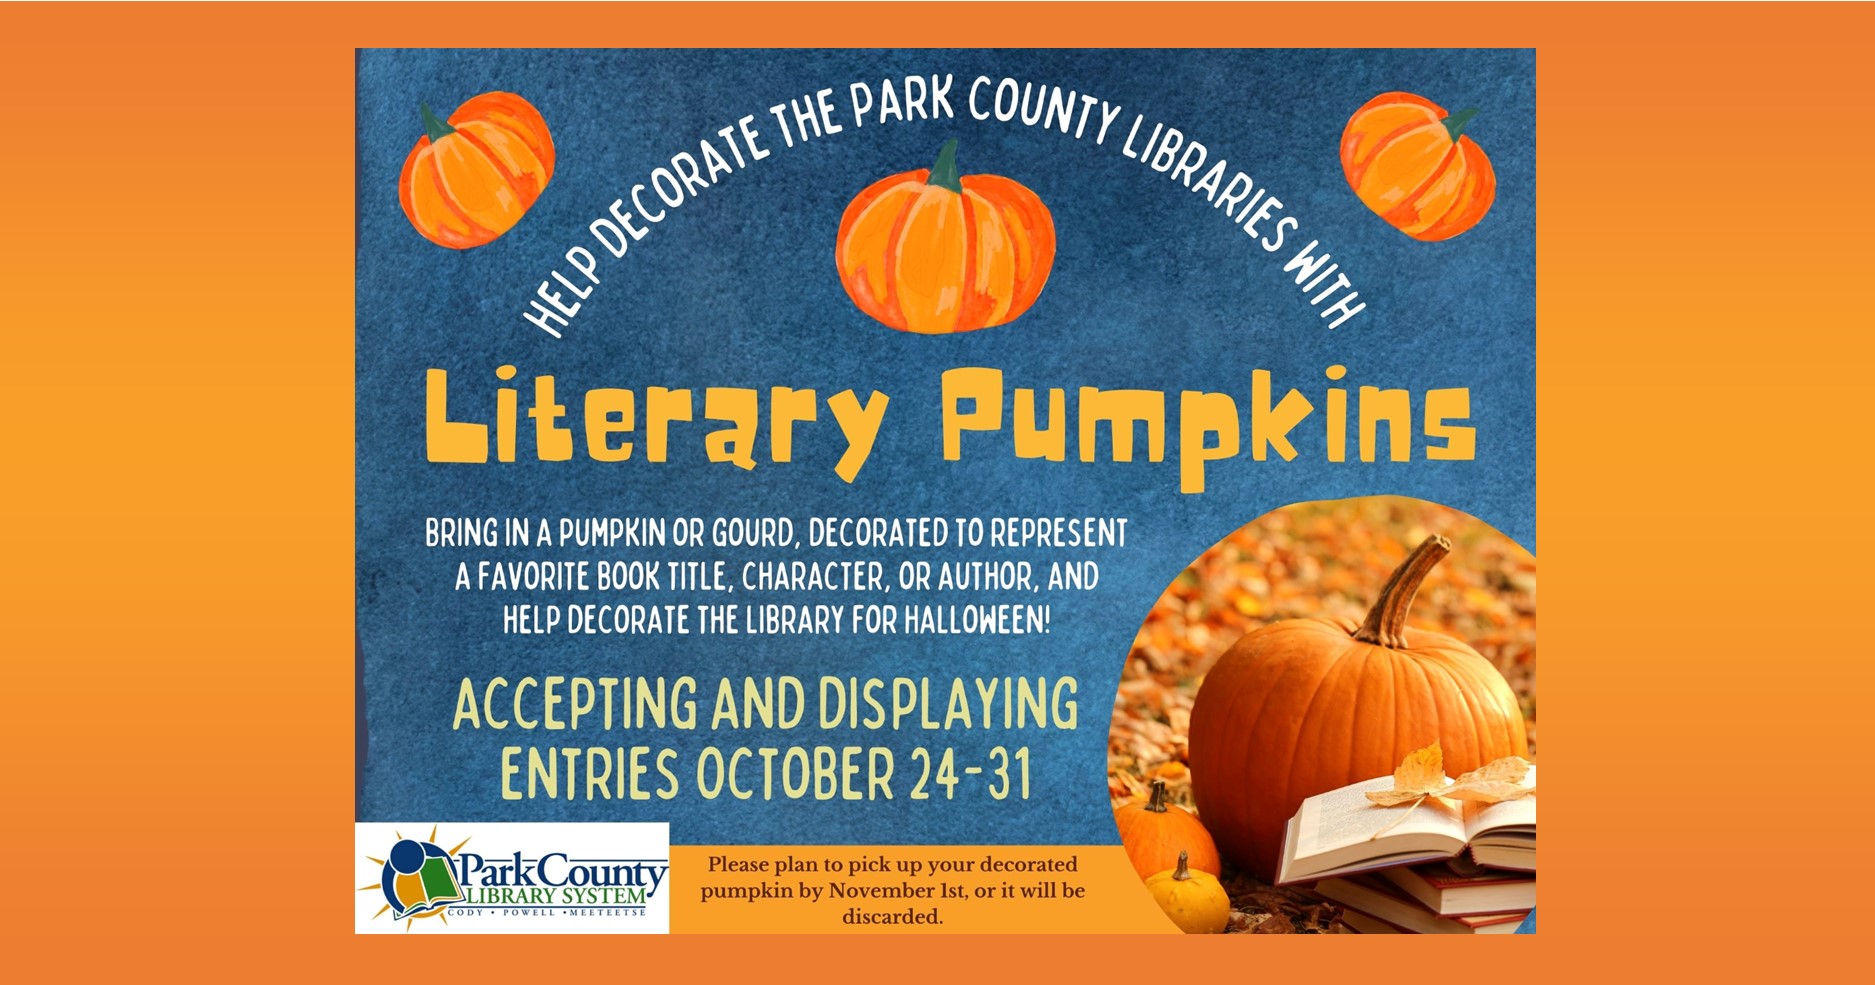 Help Decorate the Libraries with Literary Pumpkins!